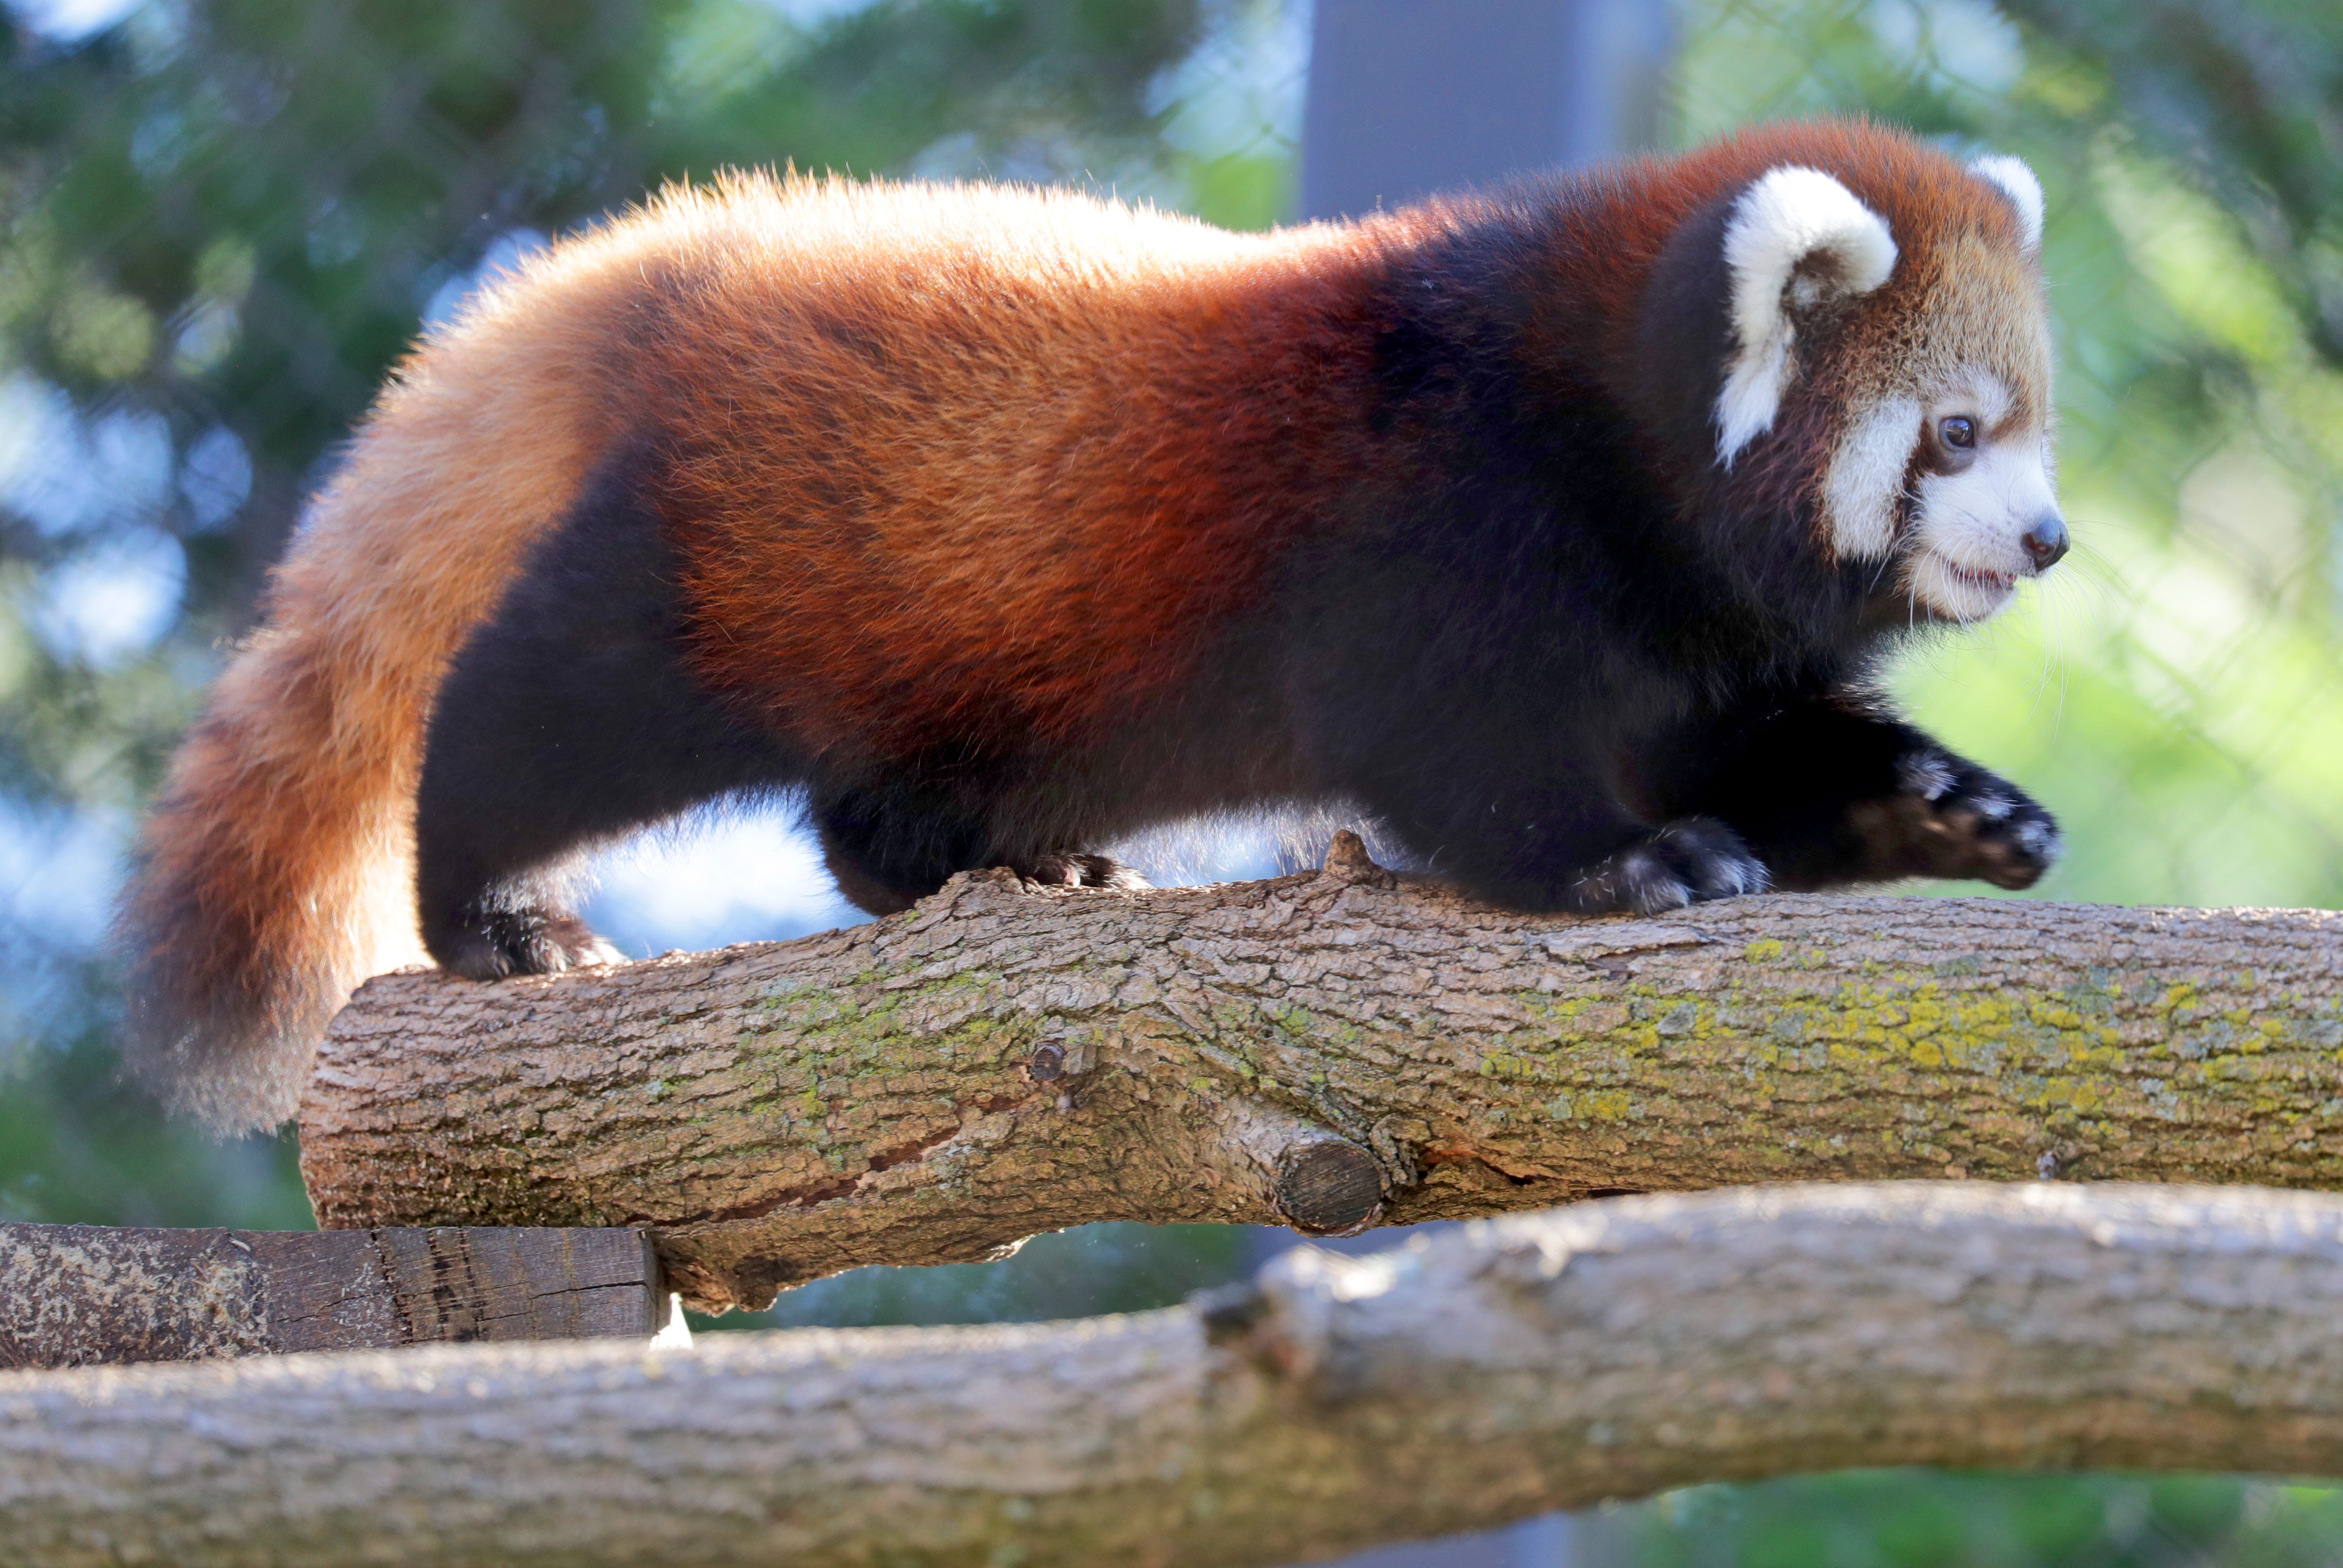 Milwaukee Zoo Announced The Birth Of Another Adorable Red Panda